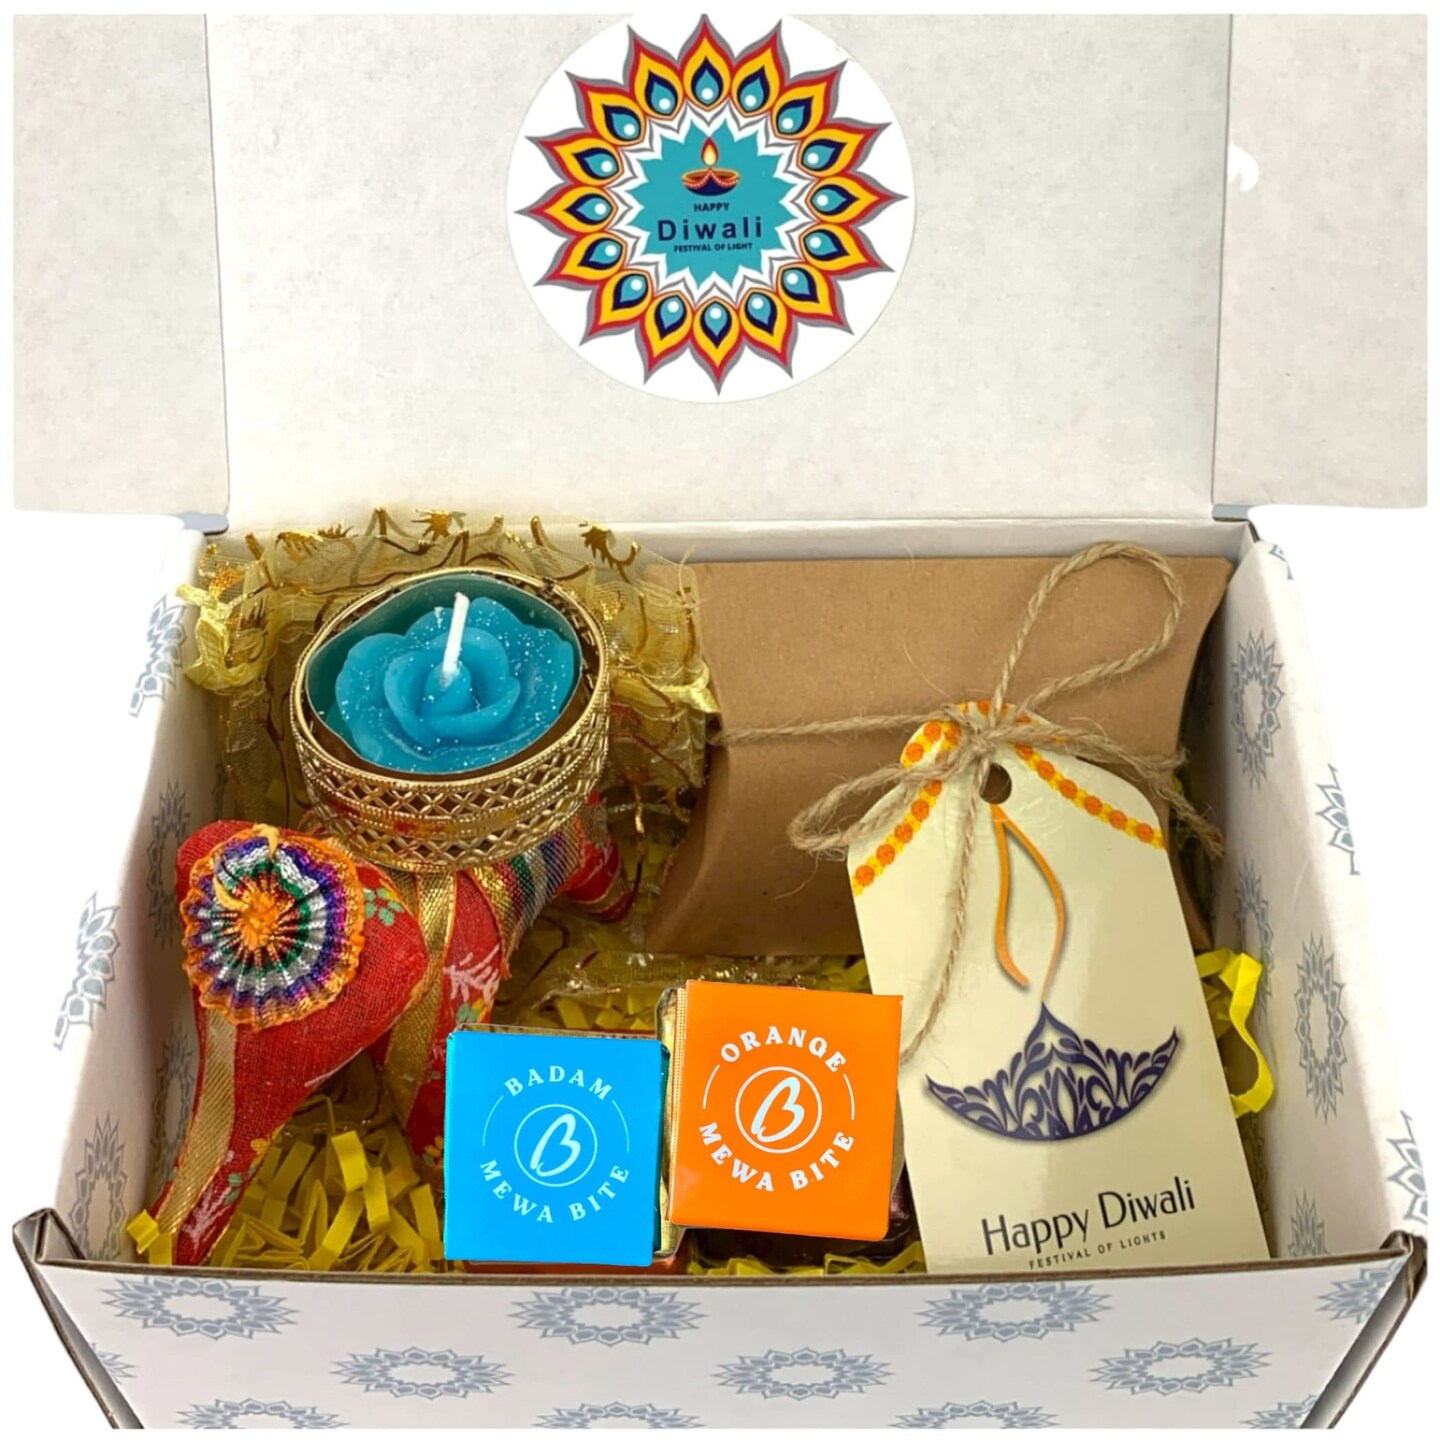 Personalized Candle Holder Diwali Gifts Boxes Handmade Home Decoration Indian Festival Housewarming Mandir Pujan Pooja Return Gifts Items Office Temple Decor Box Gift Hamper Basket